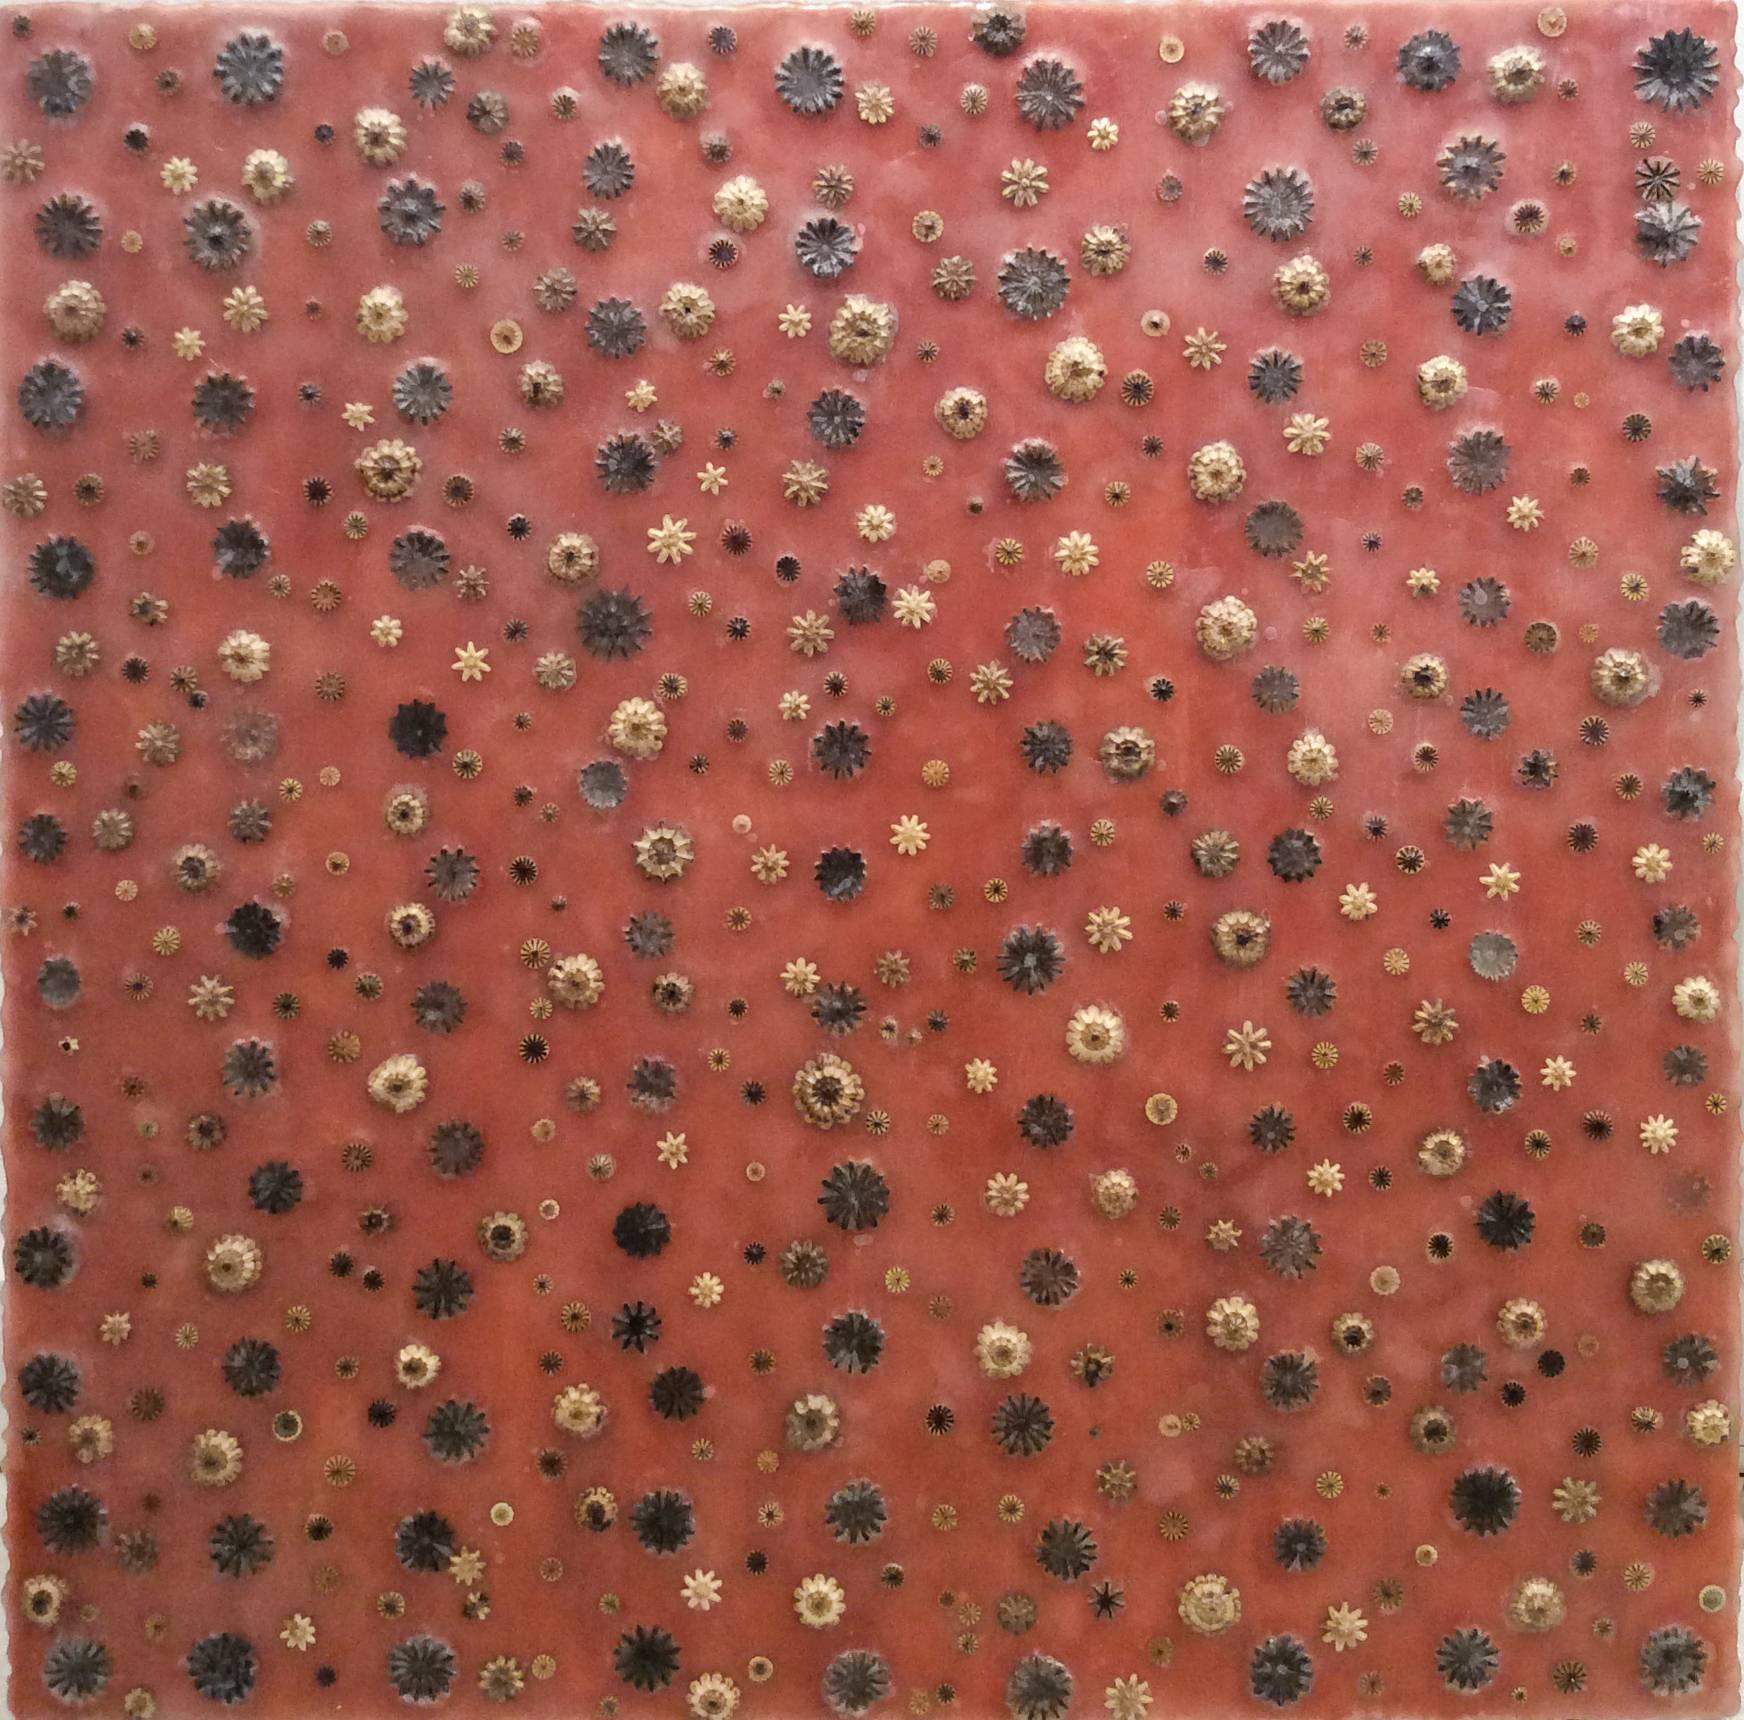 Allyson Levy Abstract Painting - Poppying In & Out (Abstract Encaustic Painting on Panel of Poppy Pods on Red) 